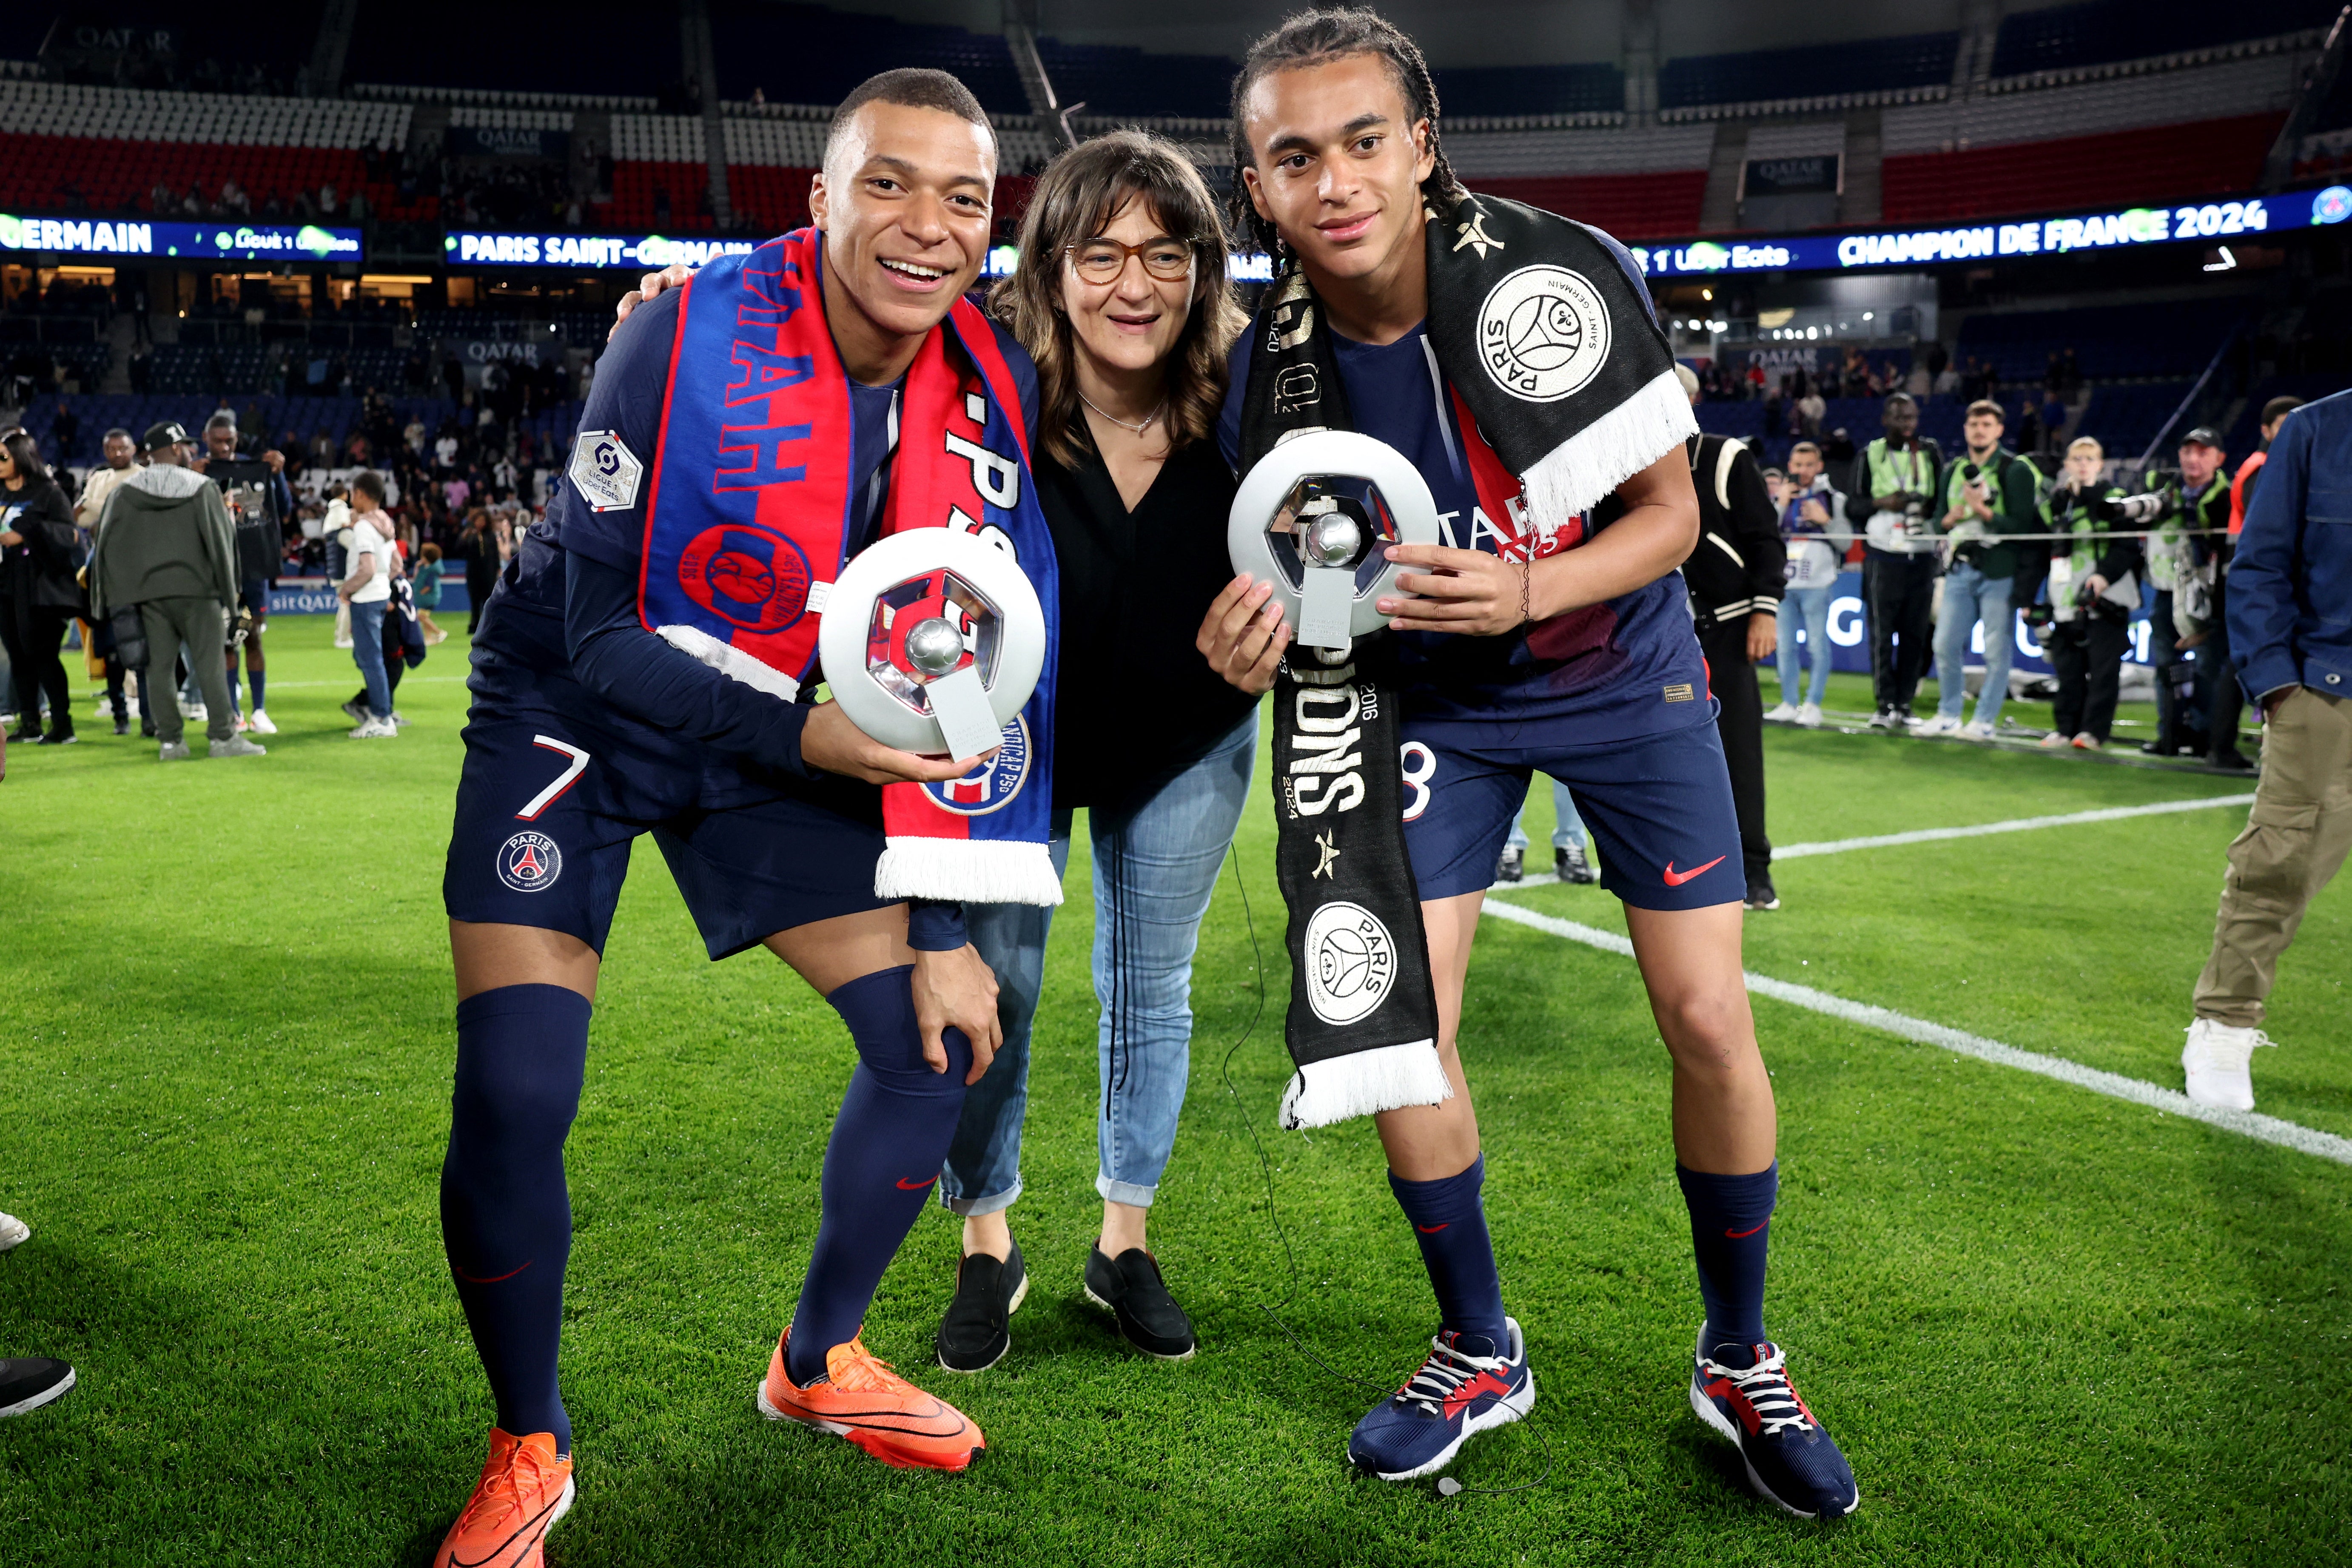 Mbappe and his brother Ethan, who also plays for PSG, pose with their mother after winning the Ligue 1 title this season.